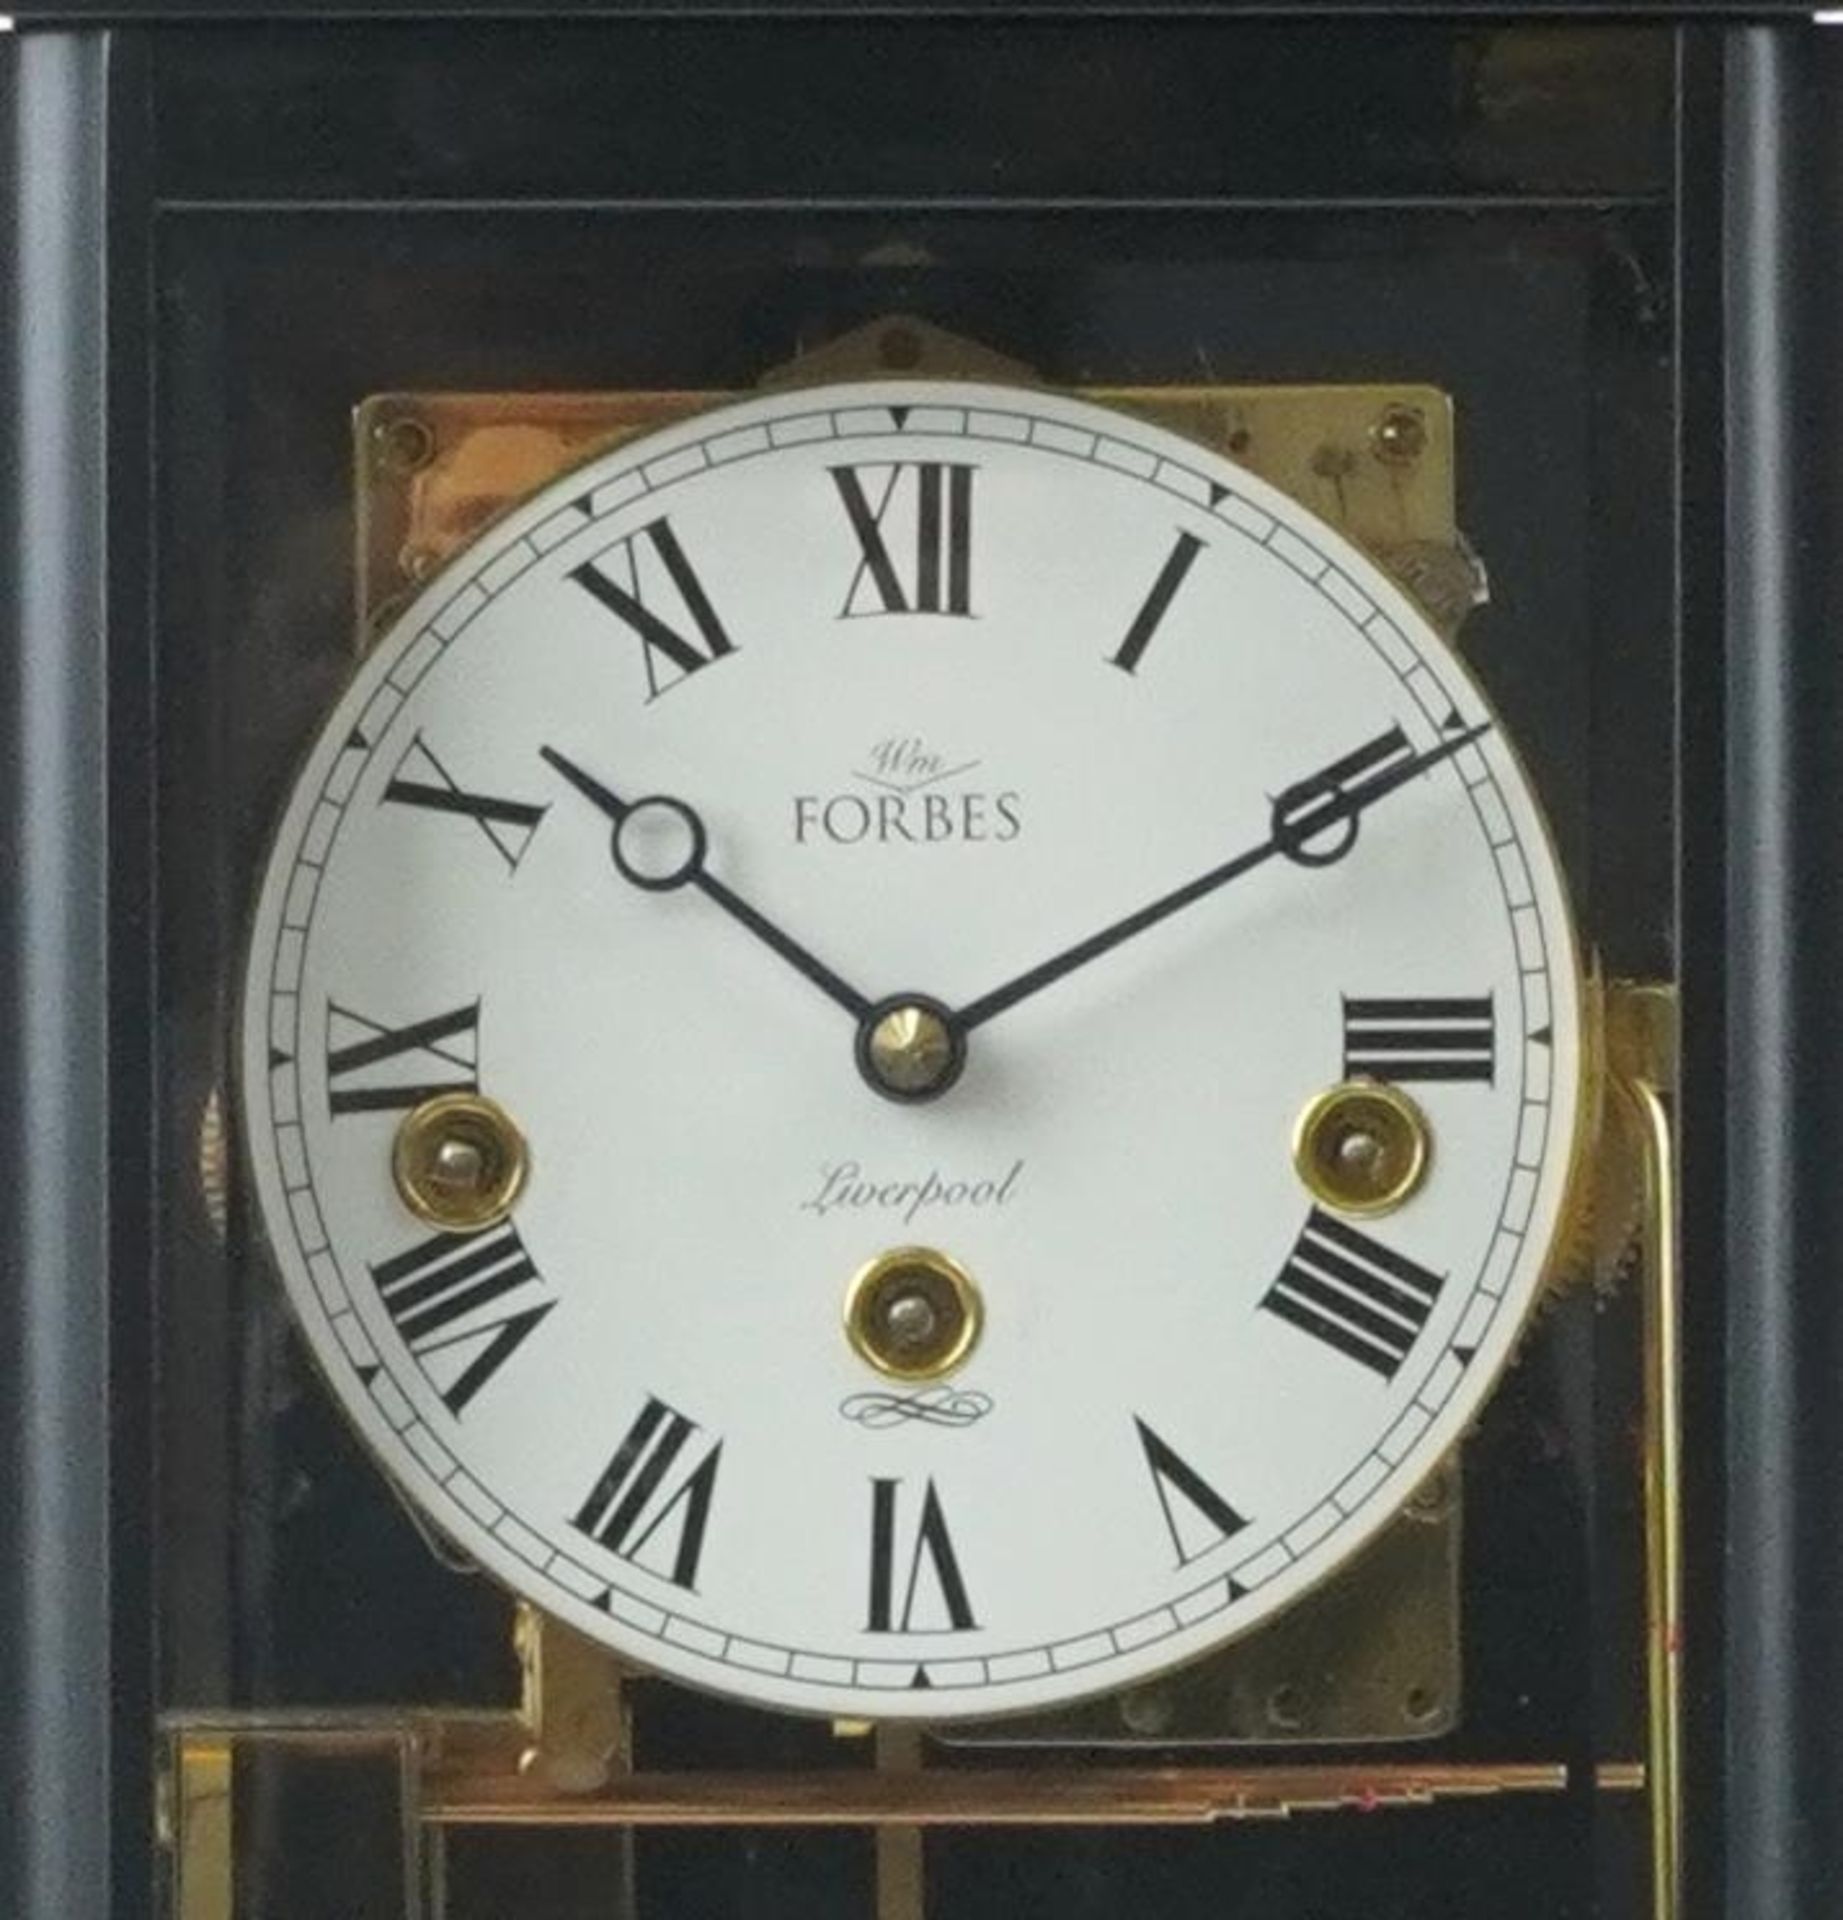 The William Forbes Windermere Viennese Regulator ebony and burr wood wall clock striking on eight - Image 2 of 6